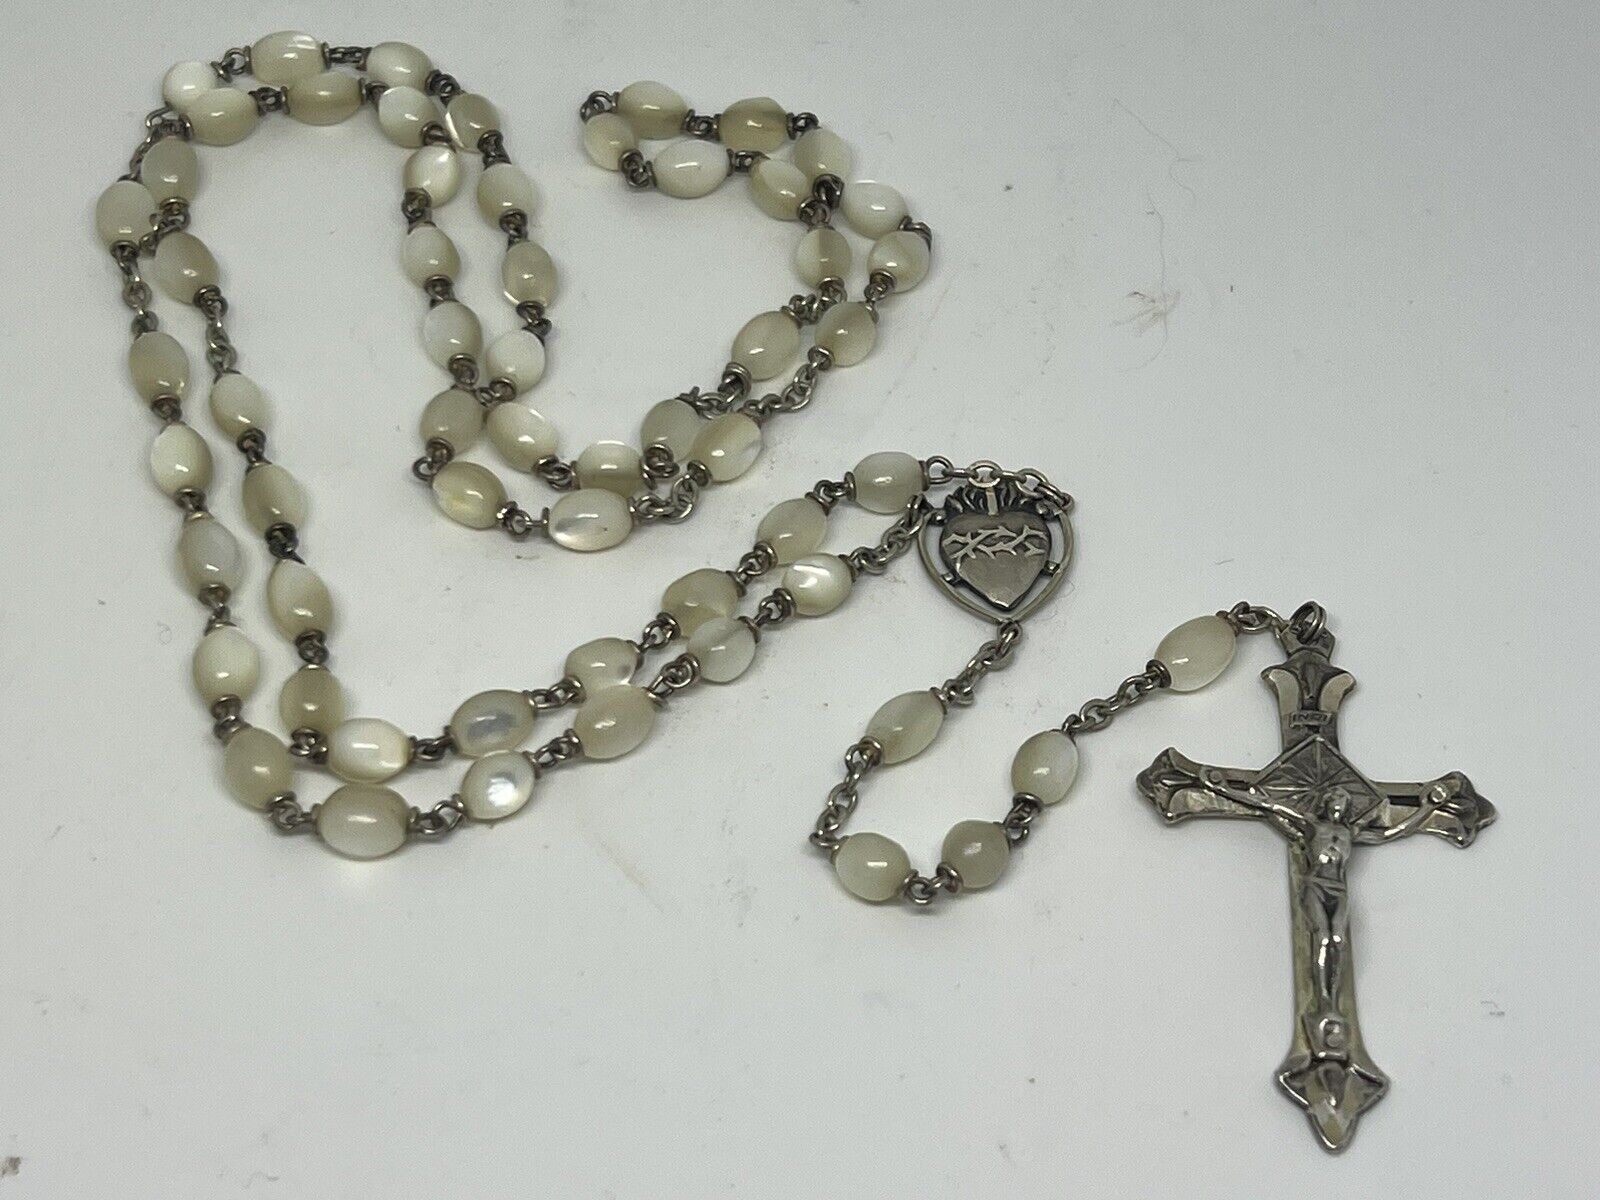 Vintage Catholic Genuine Mother Of Pearl Rosary with Sterling Silver Crucifix